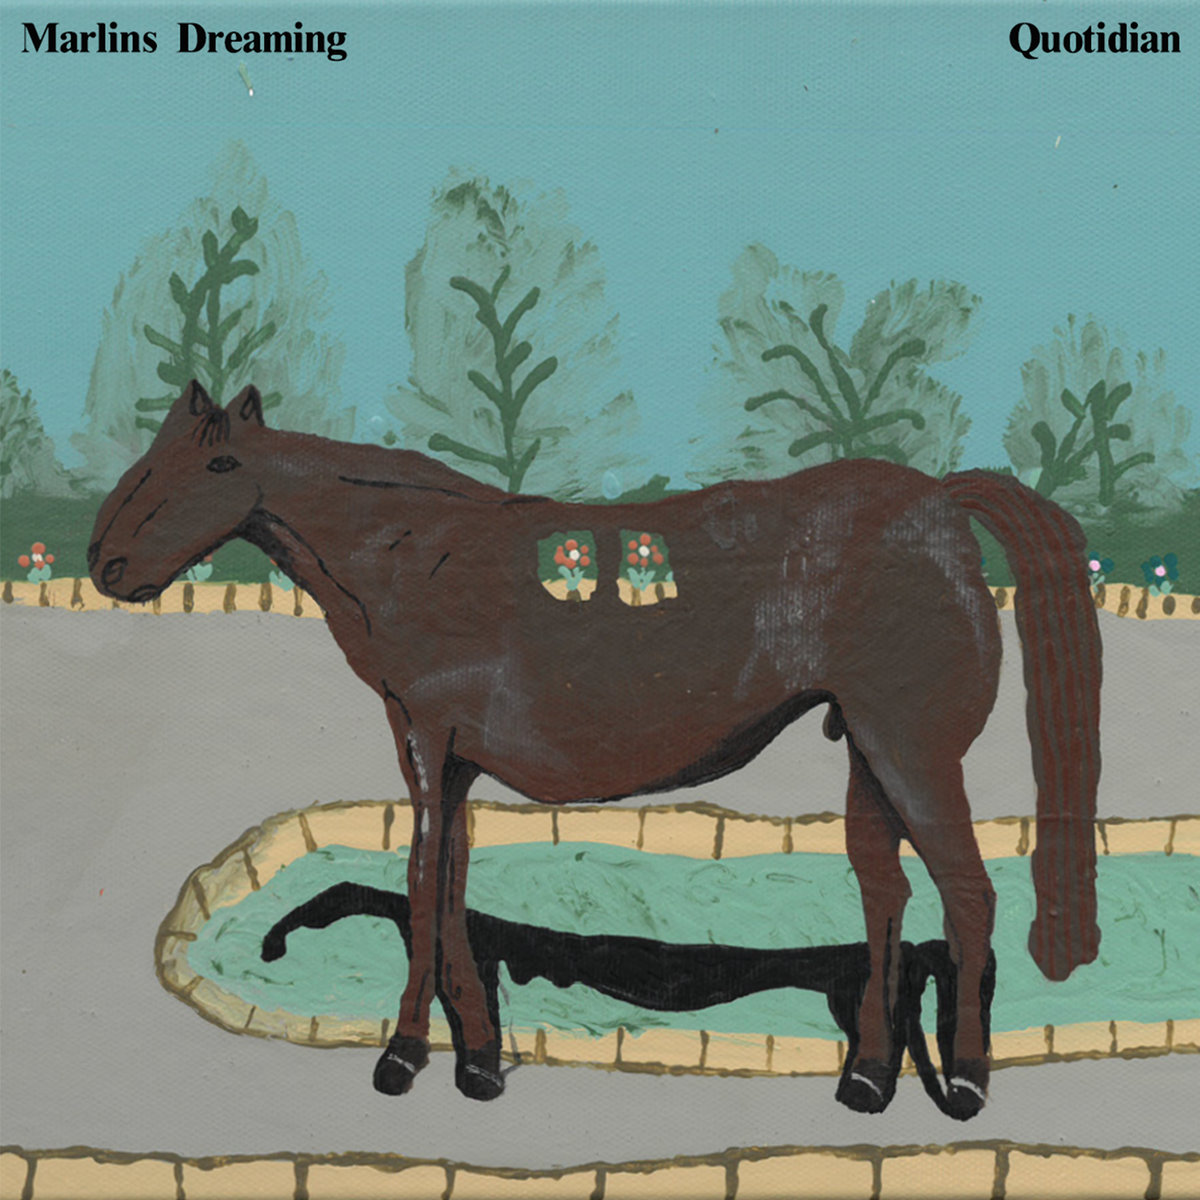 Artwork for Quotidian by Marlin's Dreaming